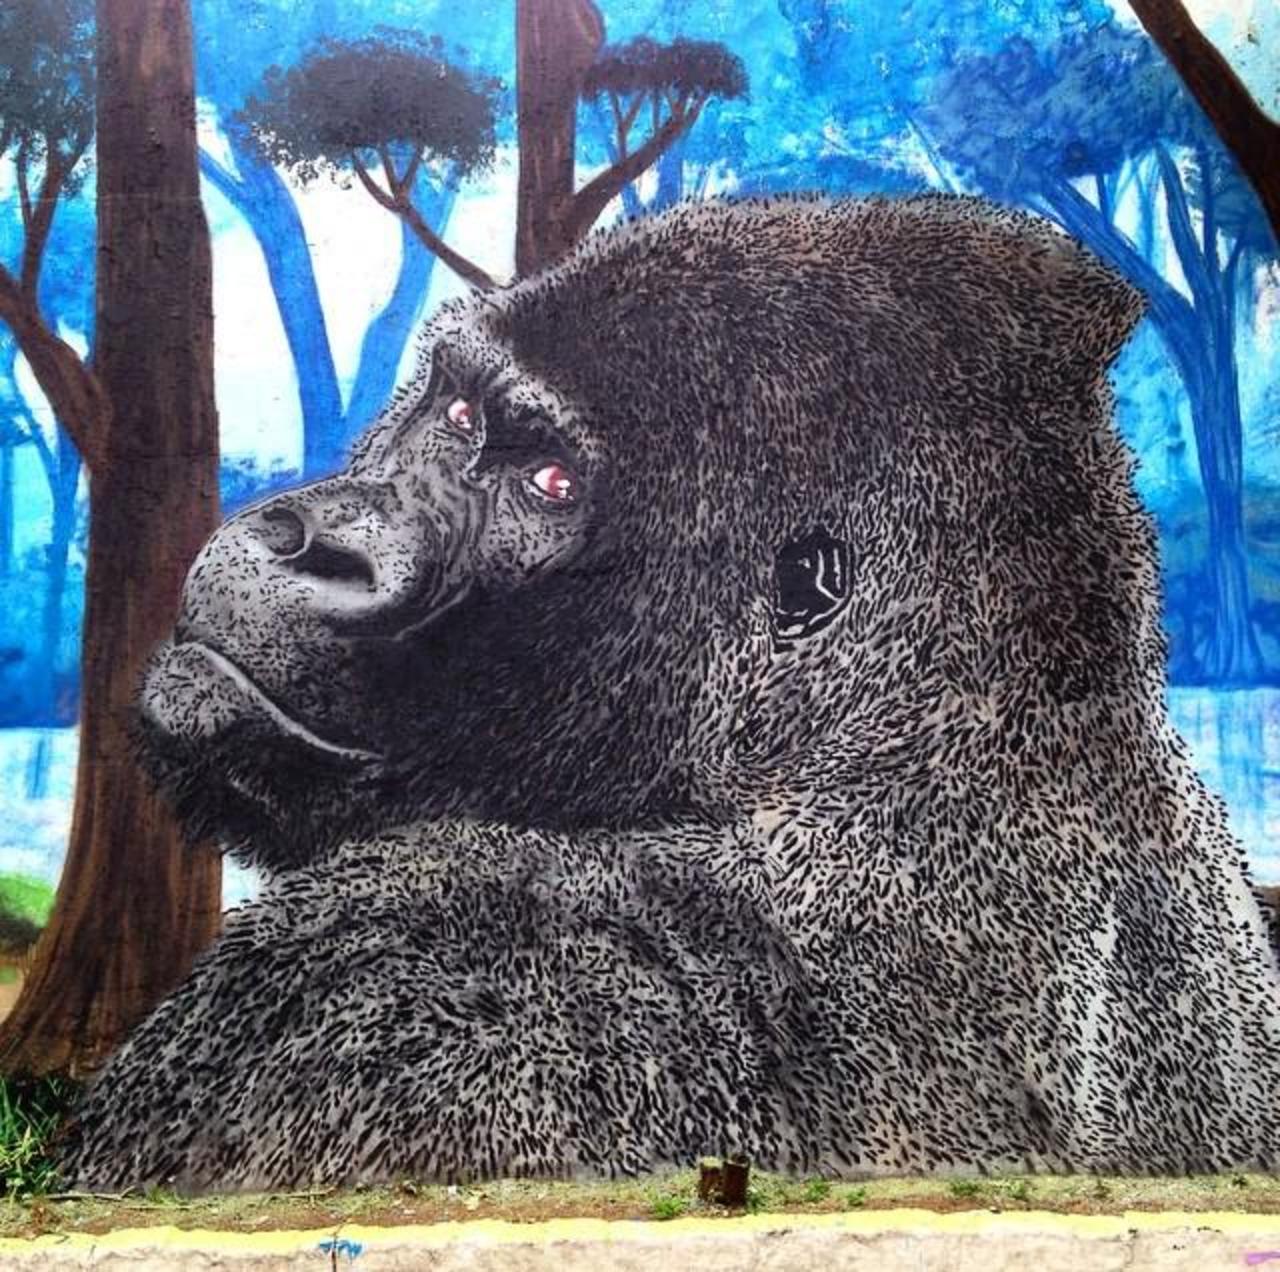 Superb Nature in Street Art piece by Thassio in São Paulo, Brazil  

#art #mural #graffiti #streetart http://t.co/aDKHWV1BMa